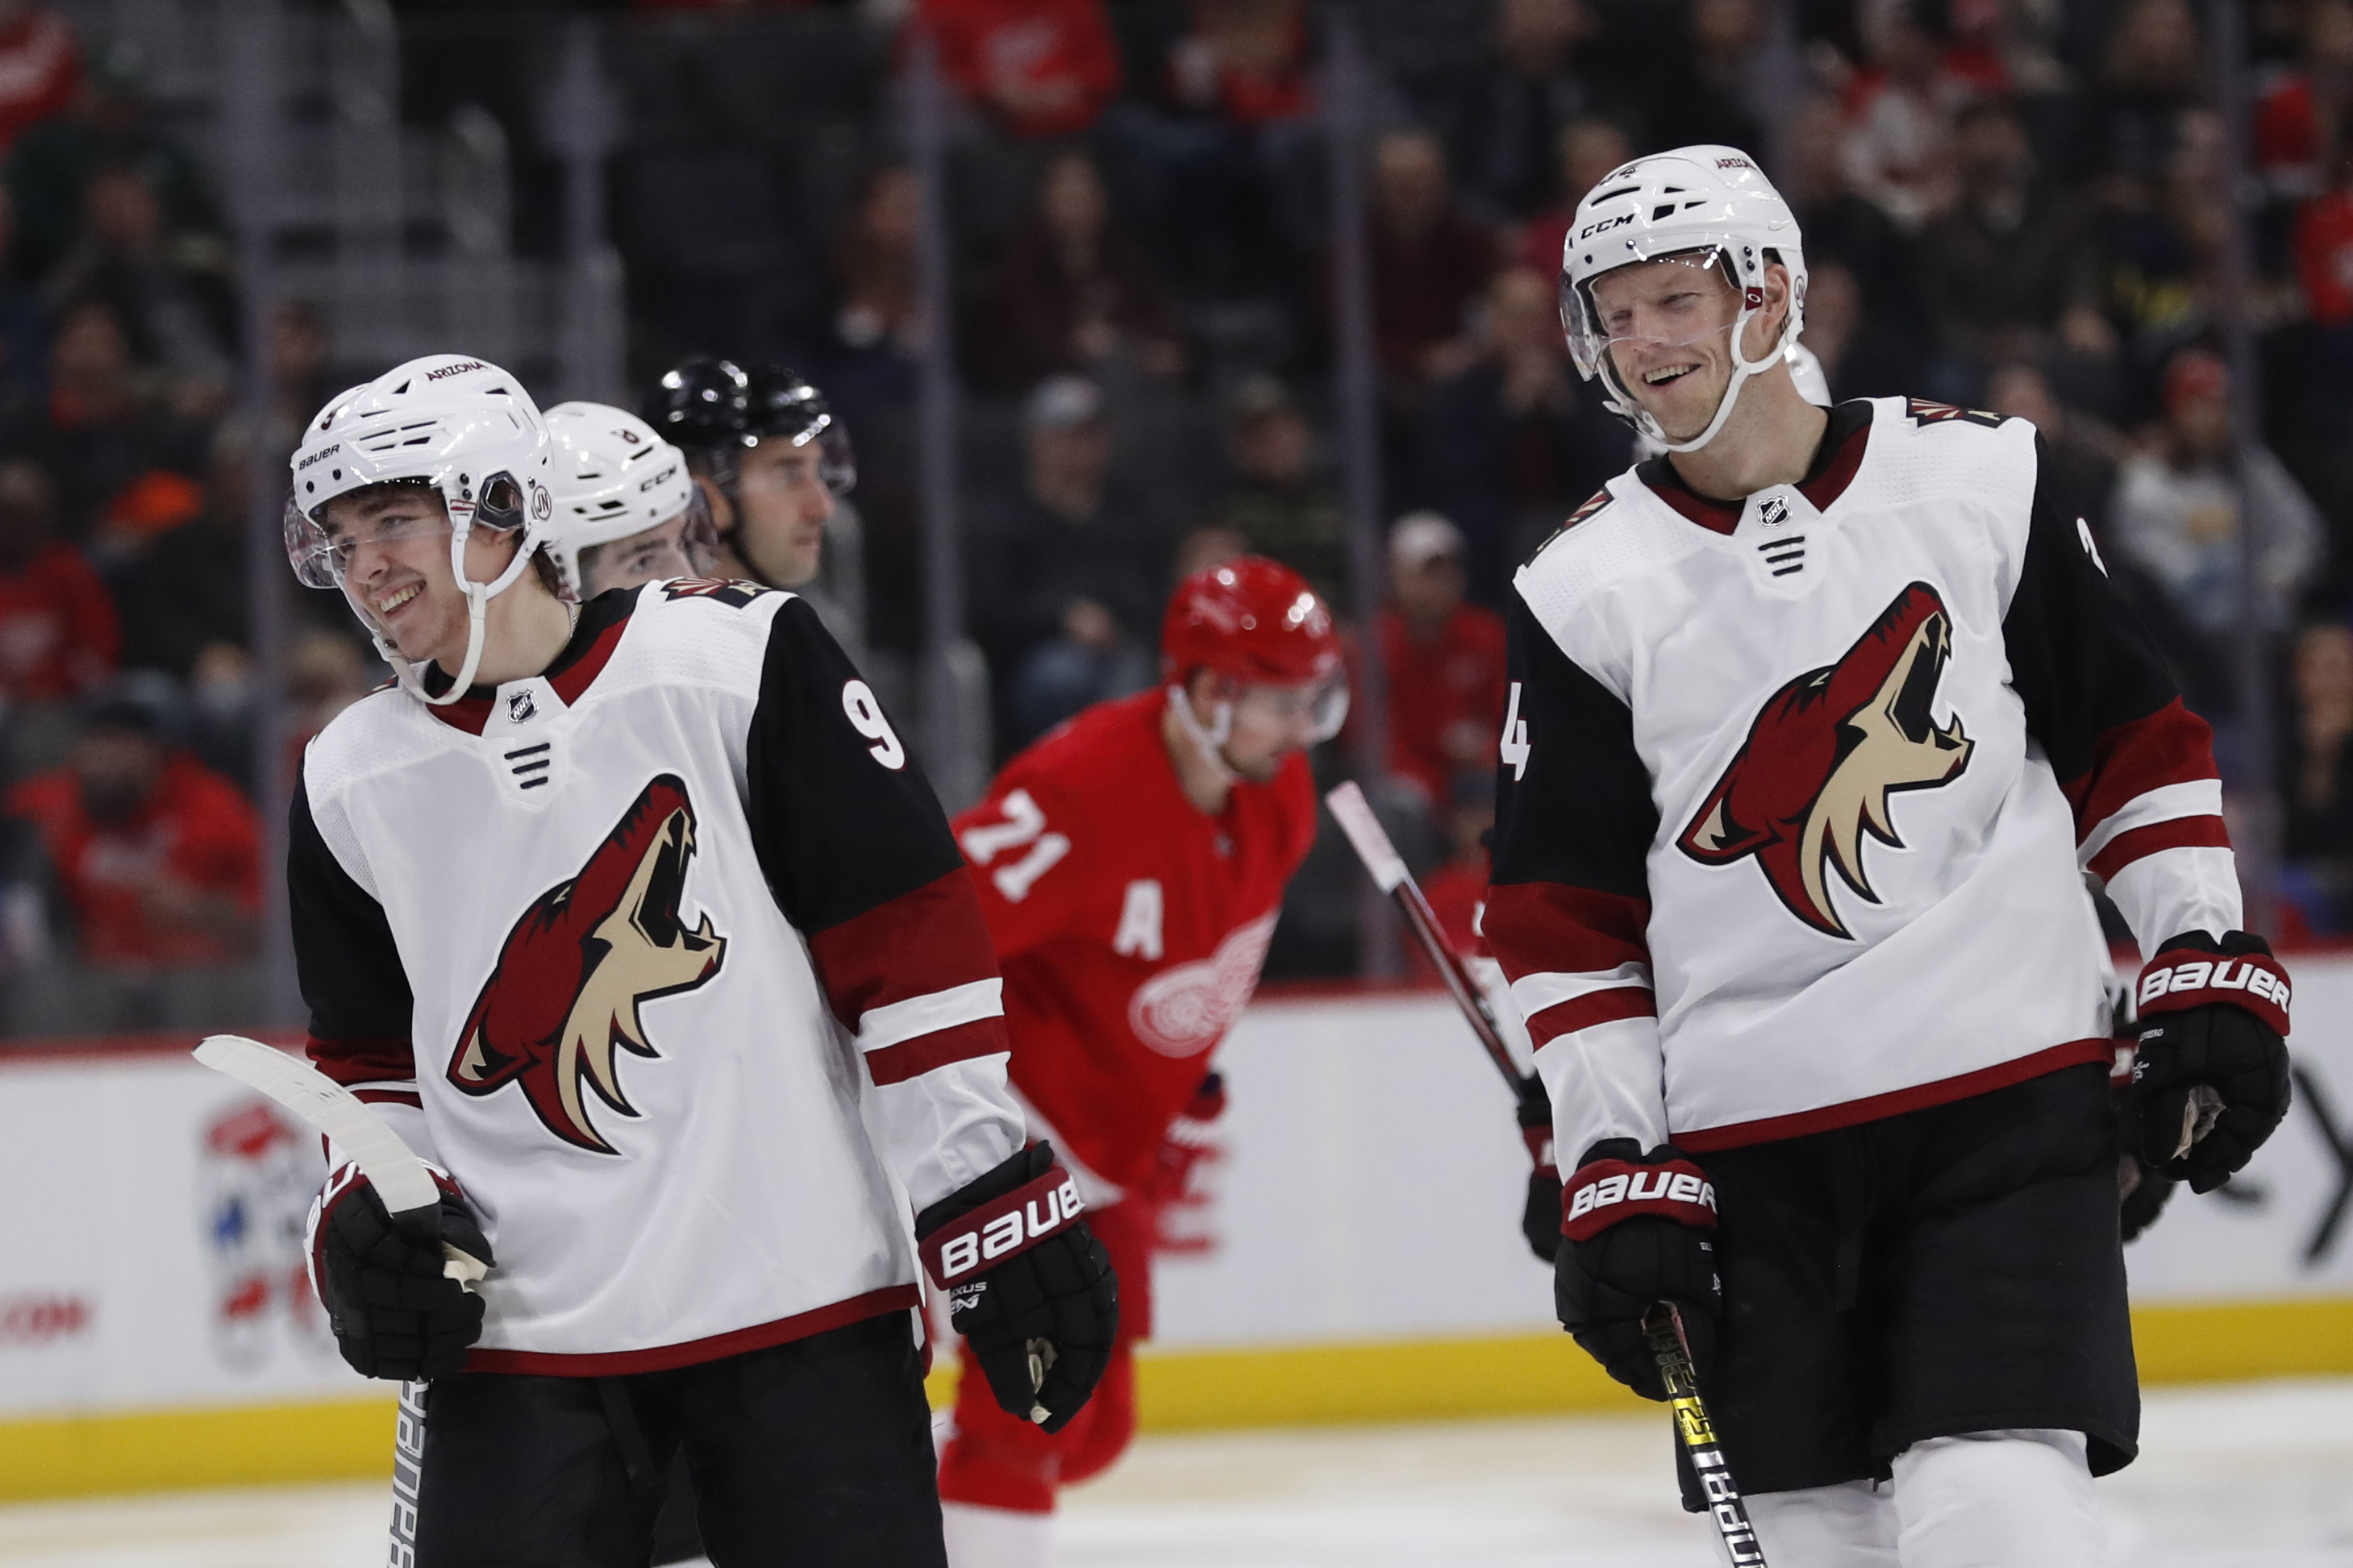 Keller scores twice to lead Coyotes past Red Wings 5-2